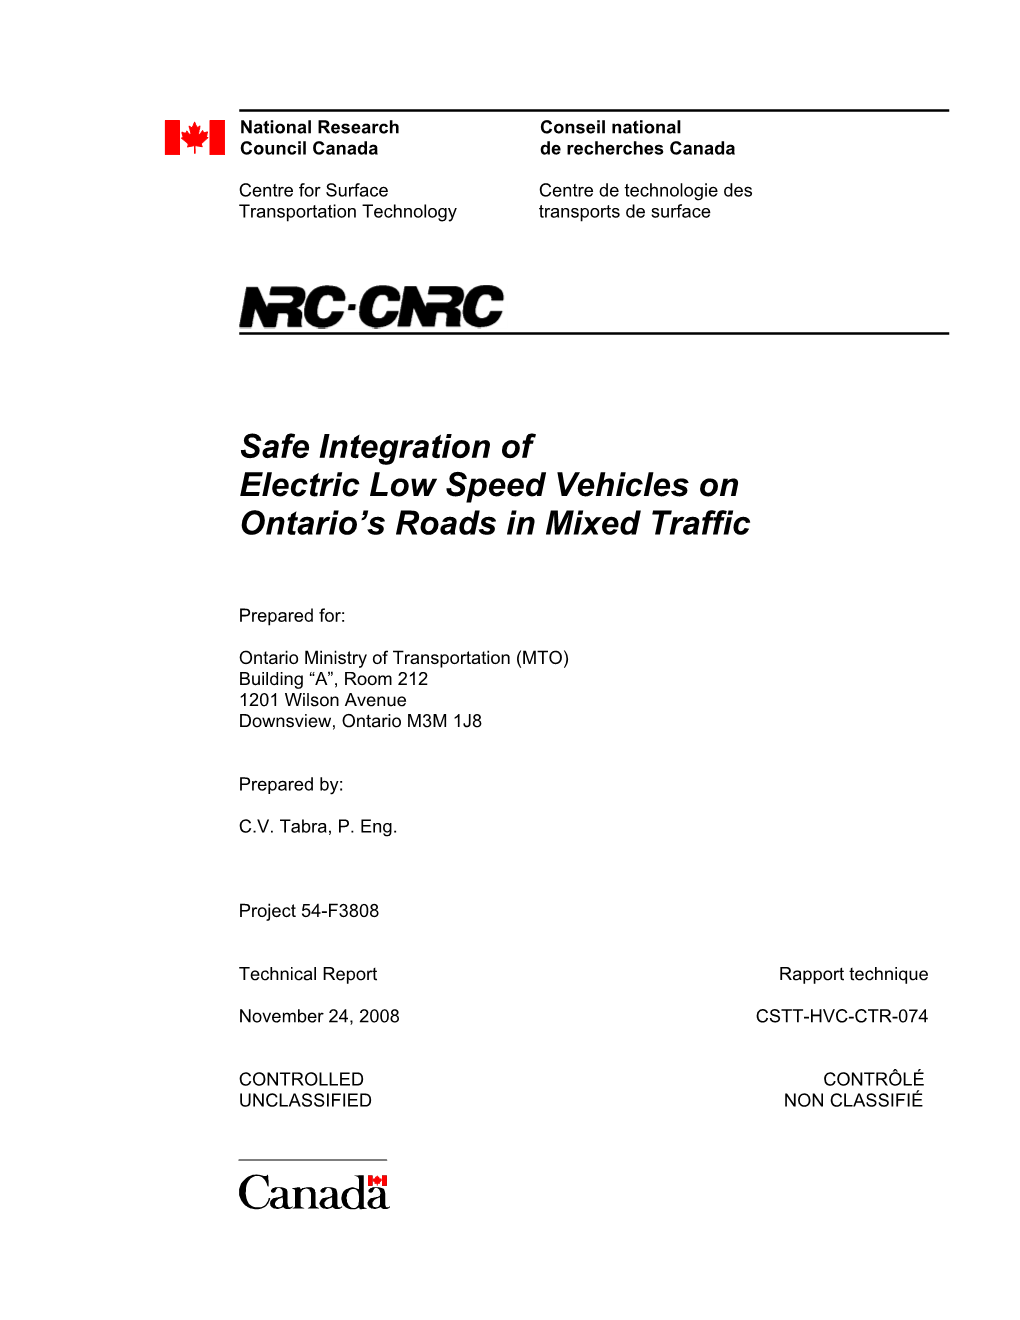 Safe Integration of Electric Low Speed Vehicles on Ontario's Roads in Mixed Traffic